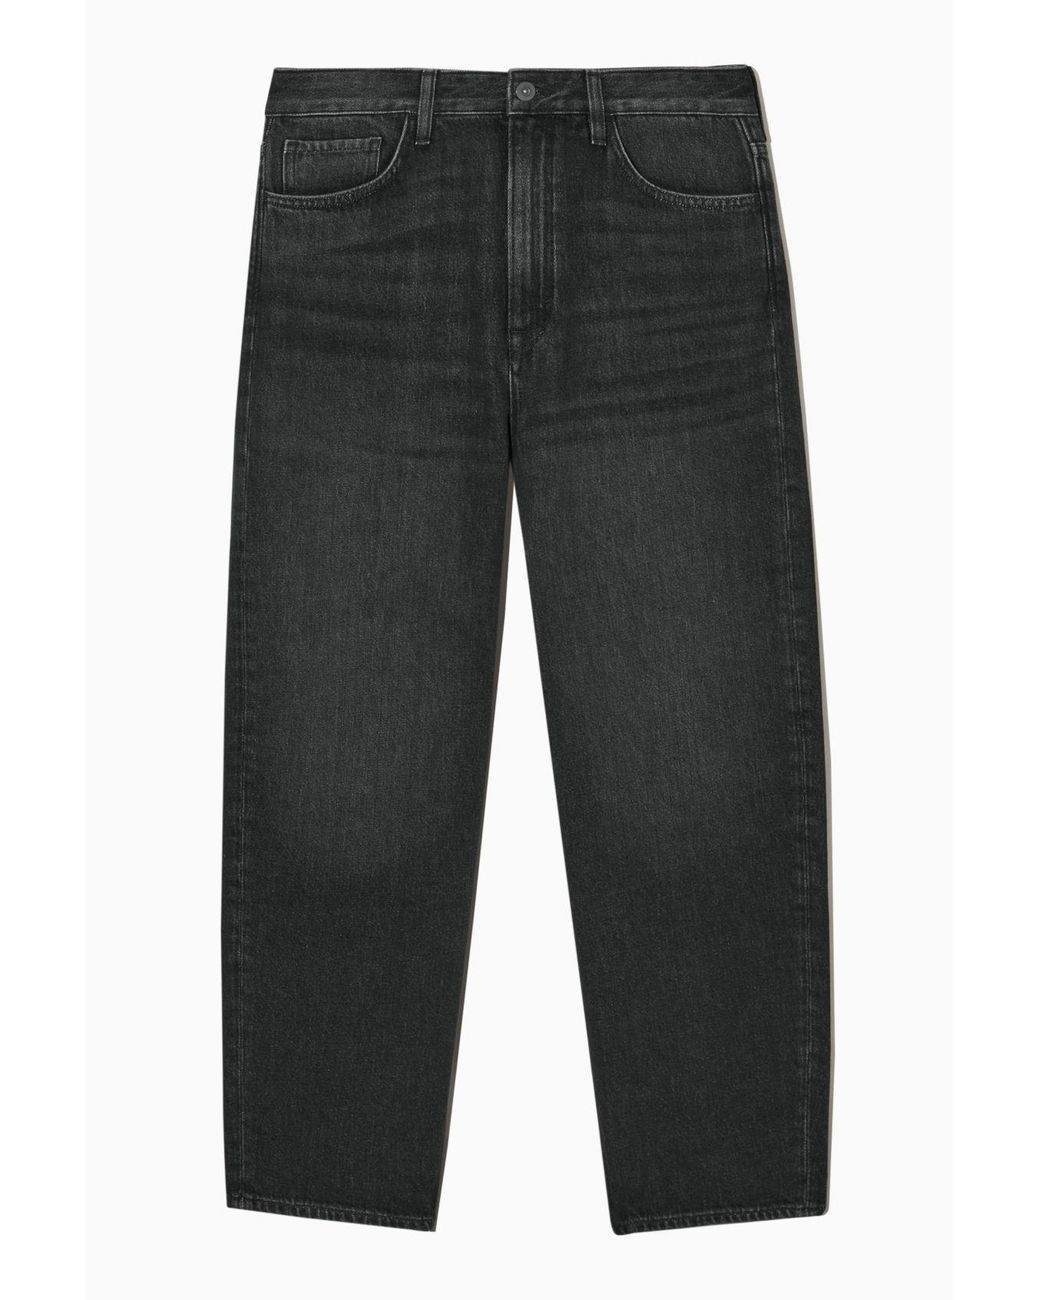 COS Tapered Ankle-length Jeans in Black | Lyst